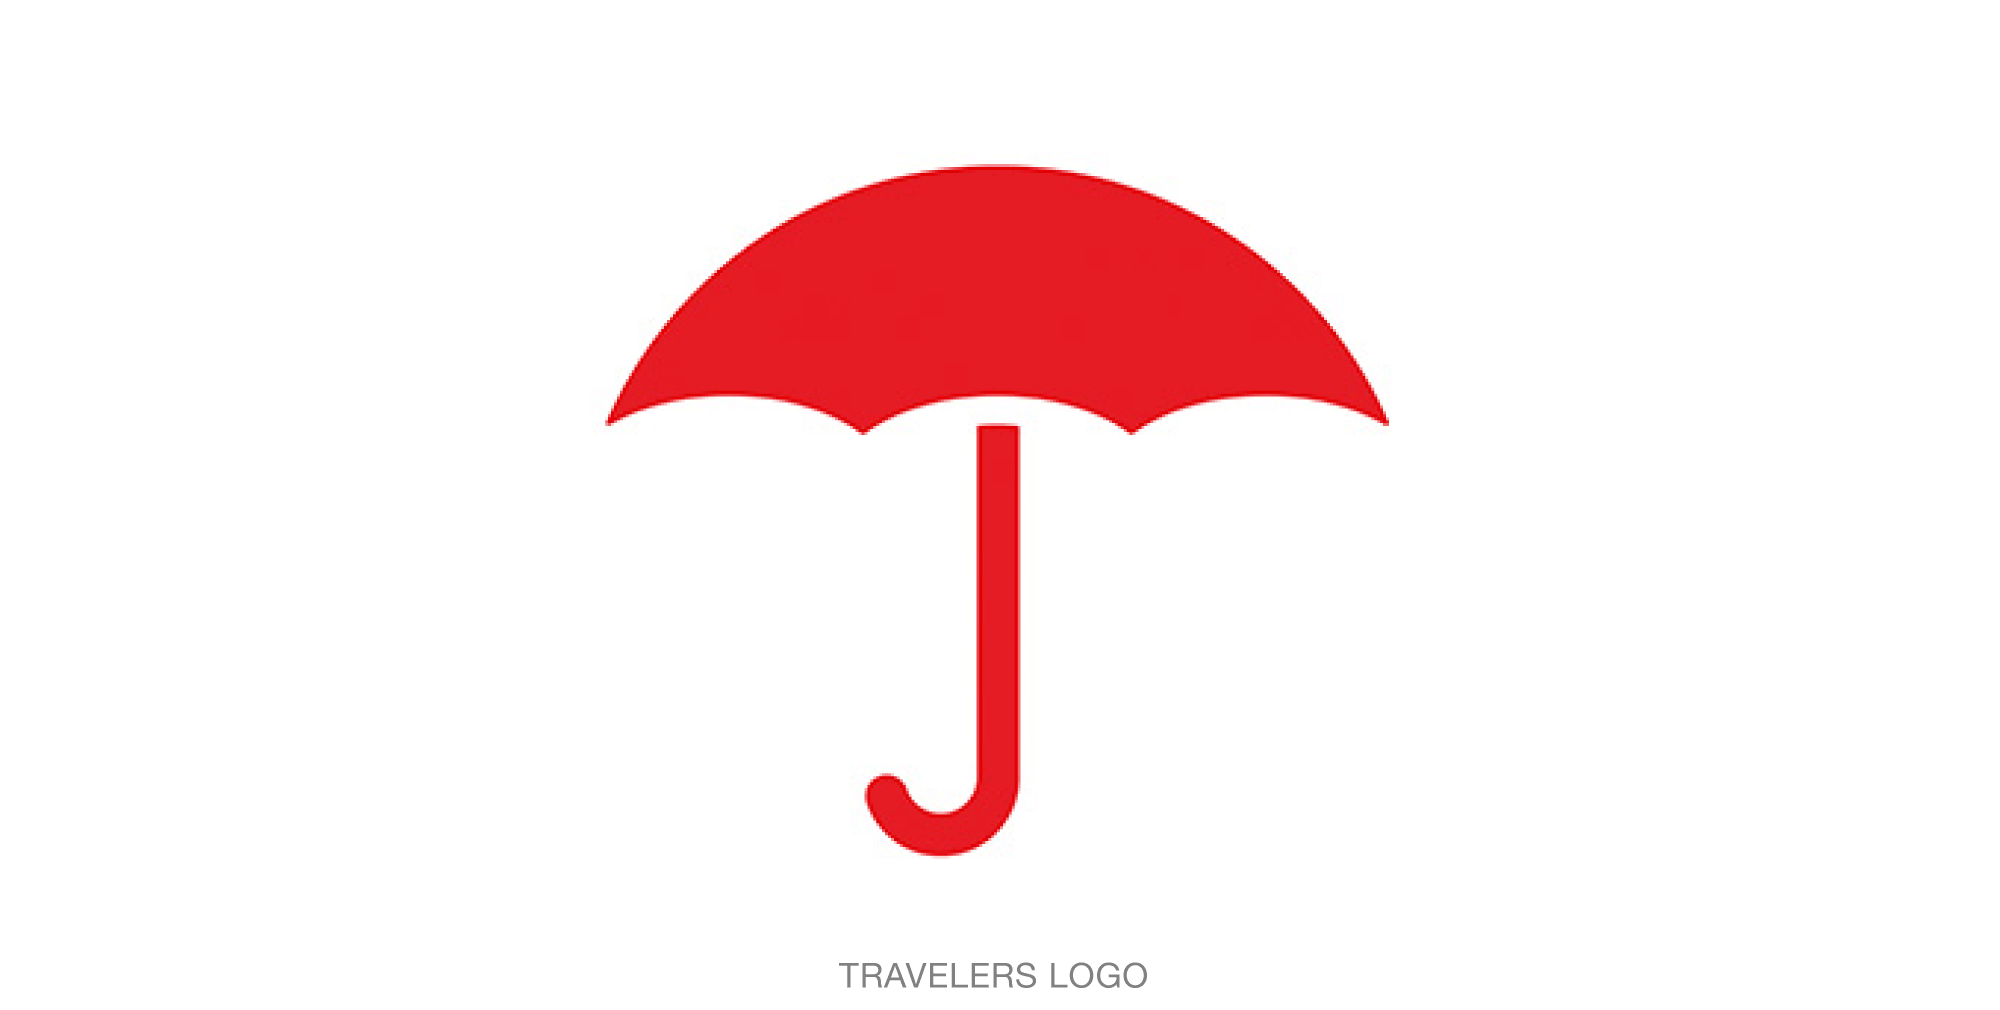 Red Umbrella Travelers Logo - Travelers Sees Red | Articles | LogoLounge